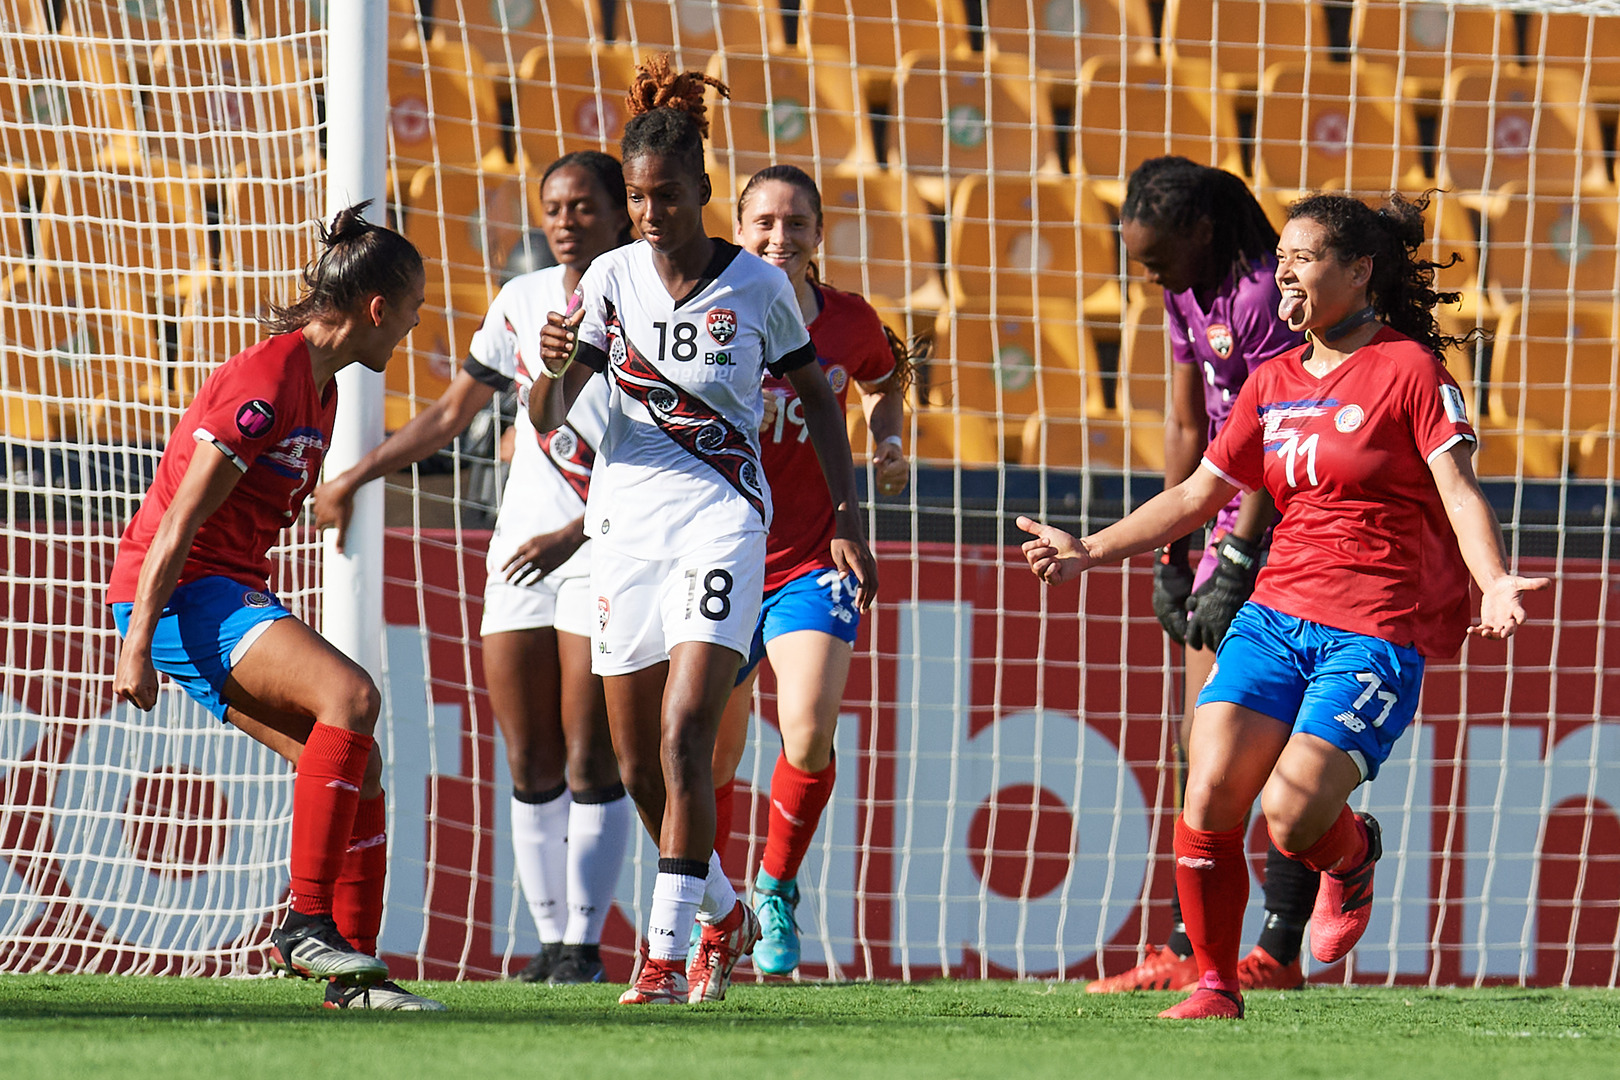 TT Women downed 4-0 by Costa Rica in CONCACAF Championship